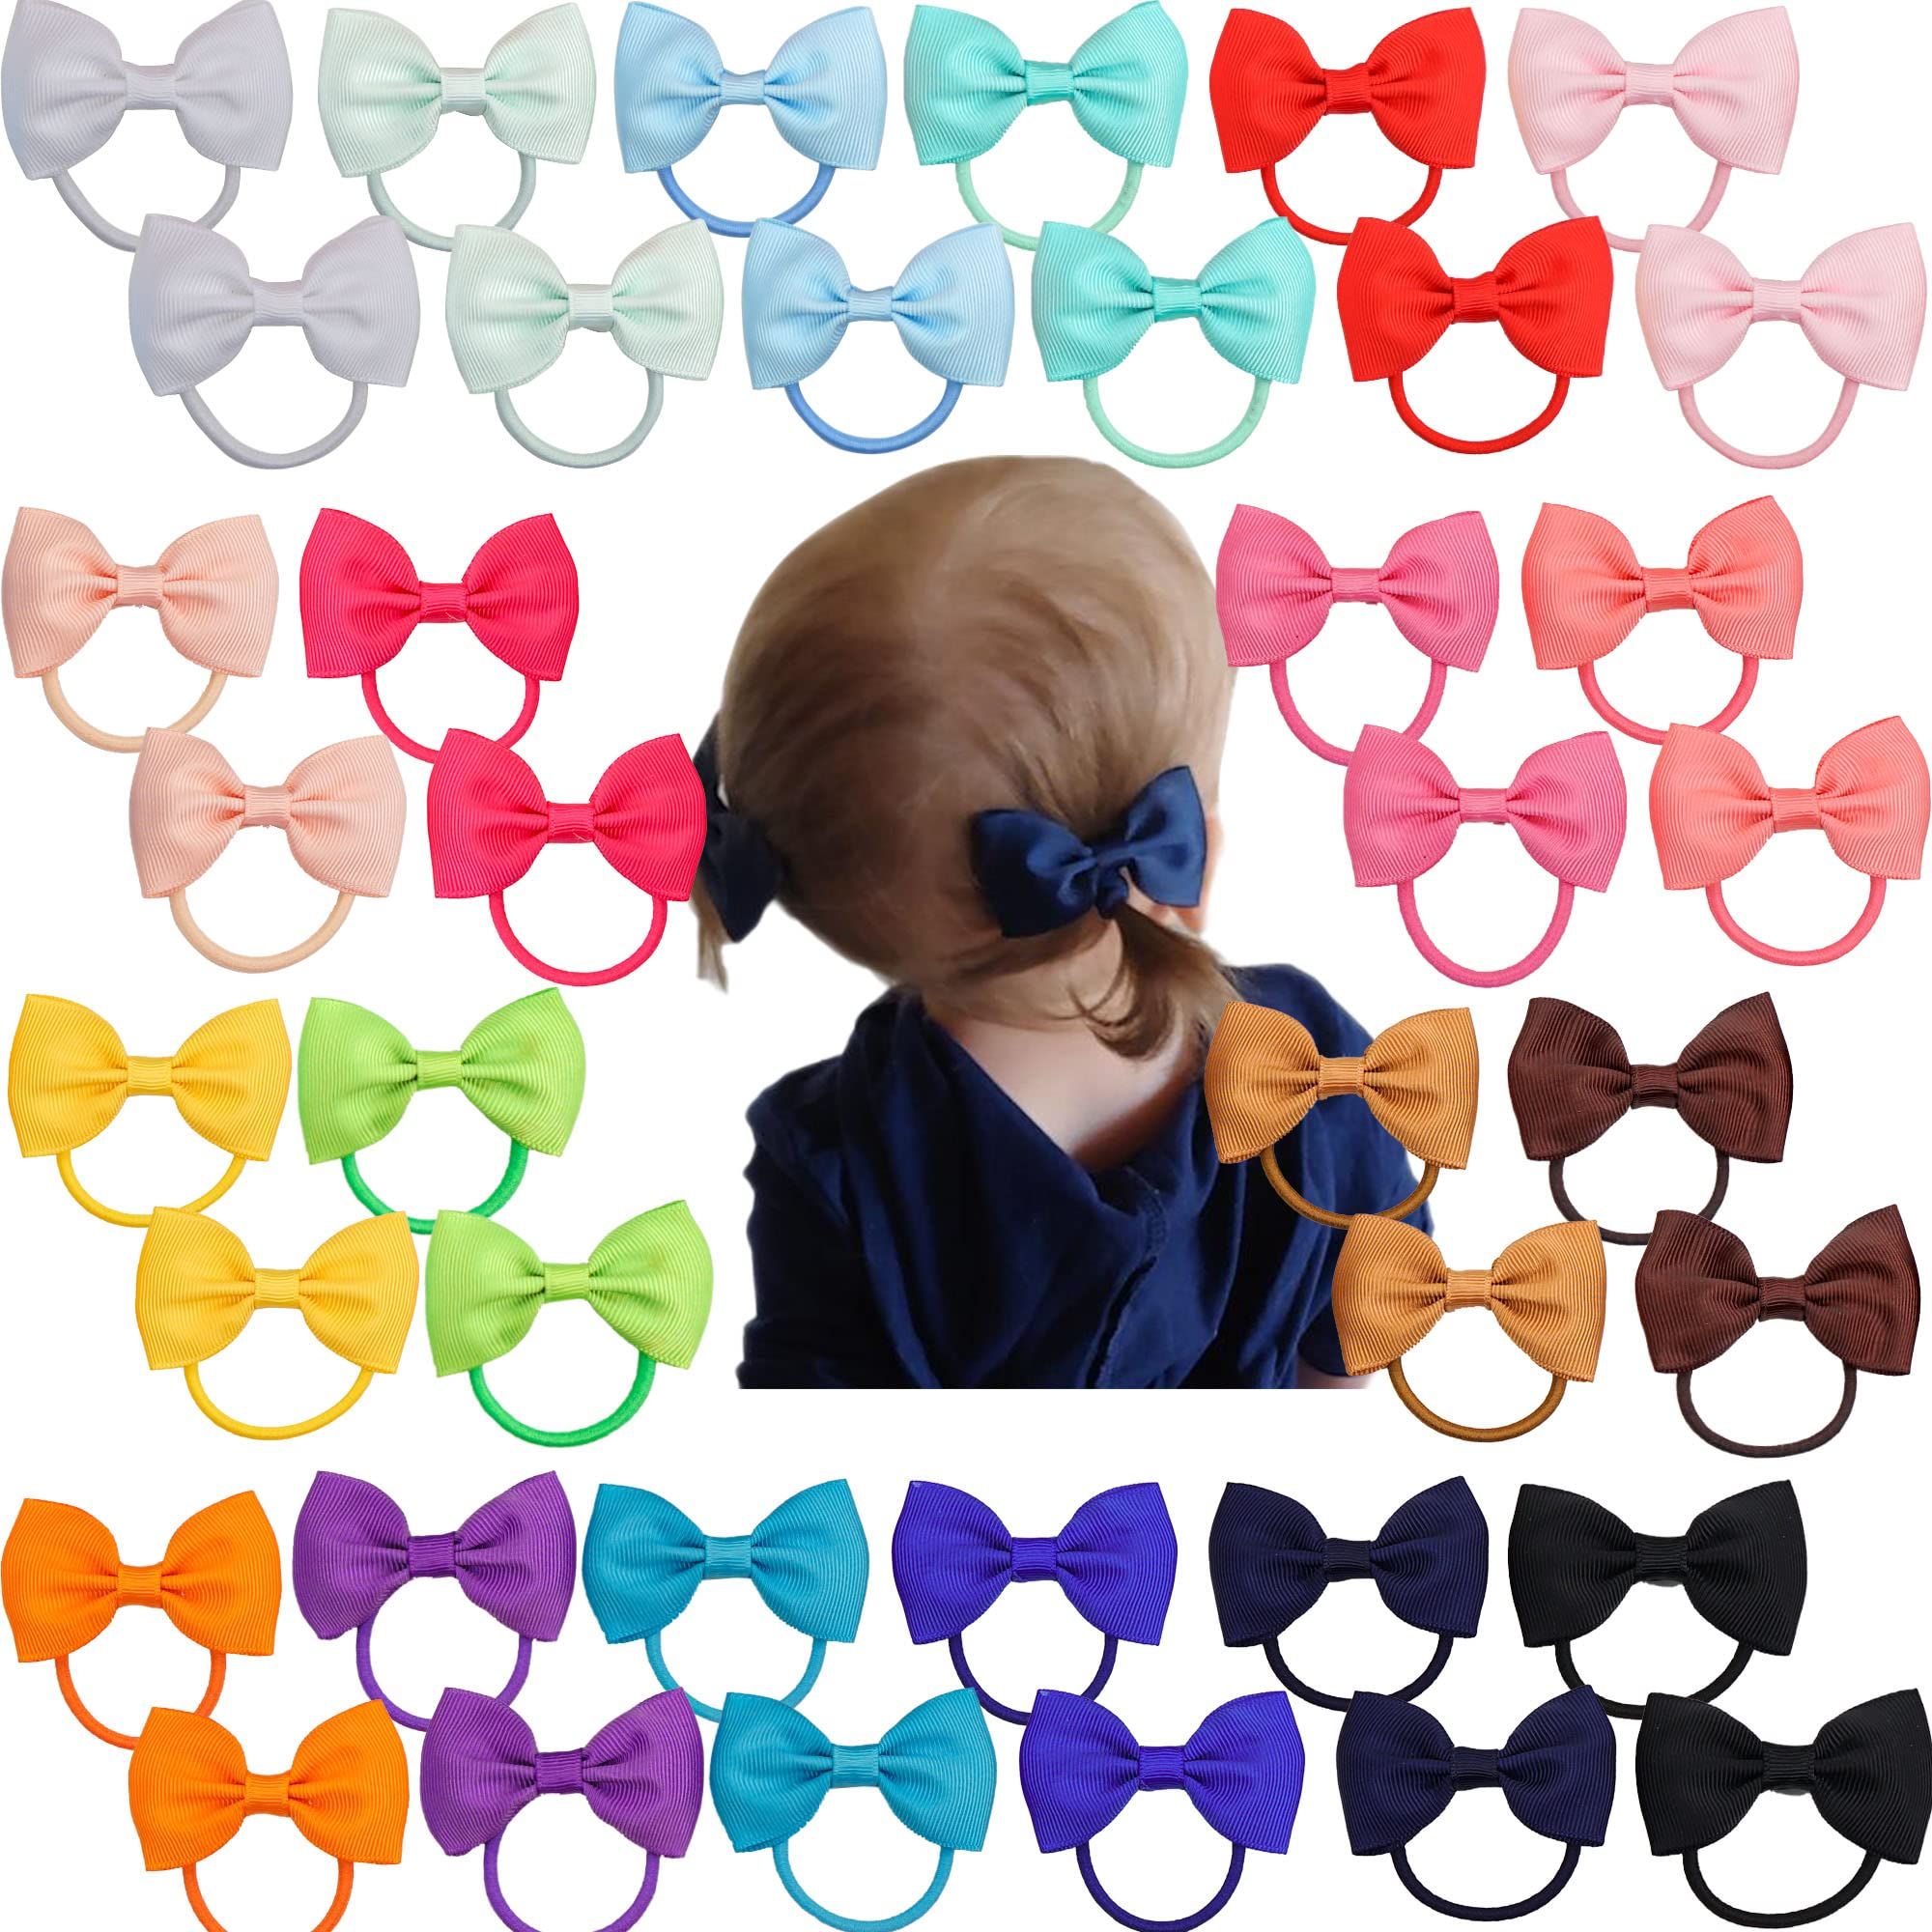 40pcs 2.75" Boutique Hair Bows Tie Baby Girls Kids Children Rubber Band Ribbon Hair bands | Amazon (US)